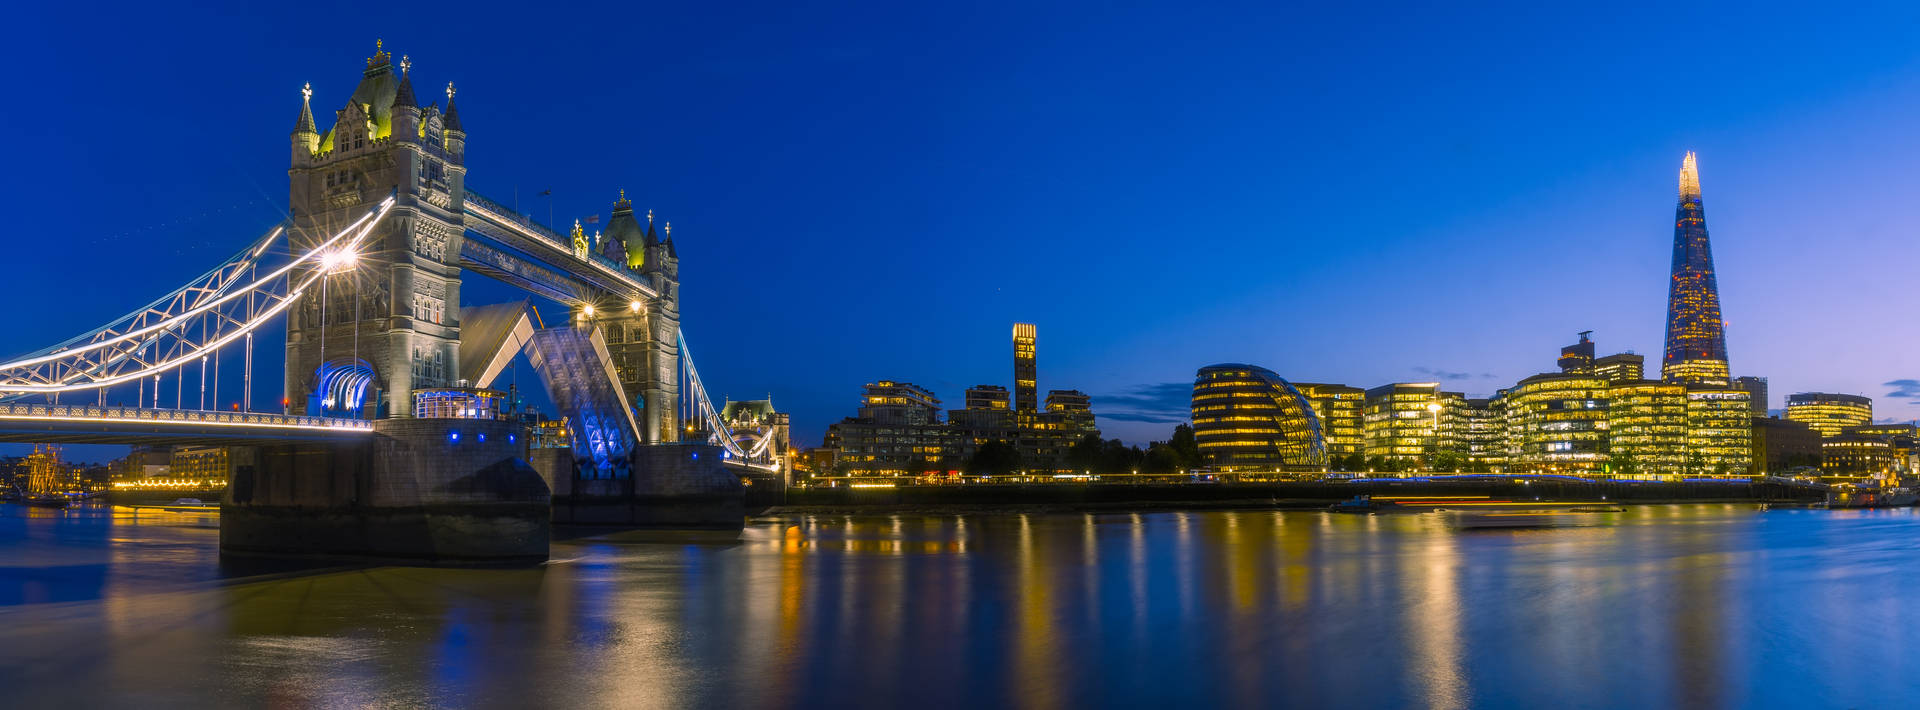 Tower Bridge And Buildings At Night Background